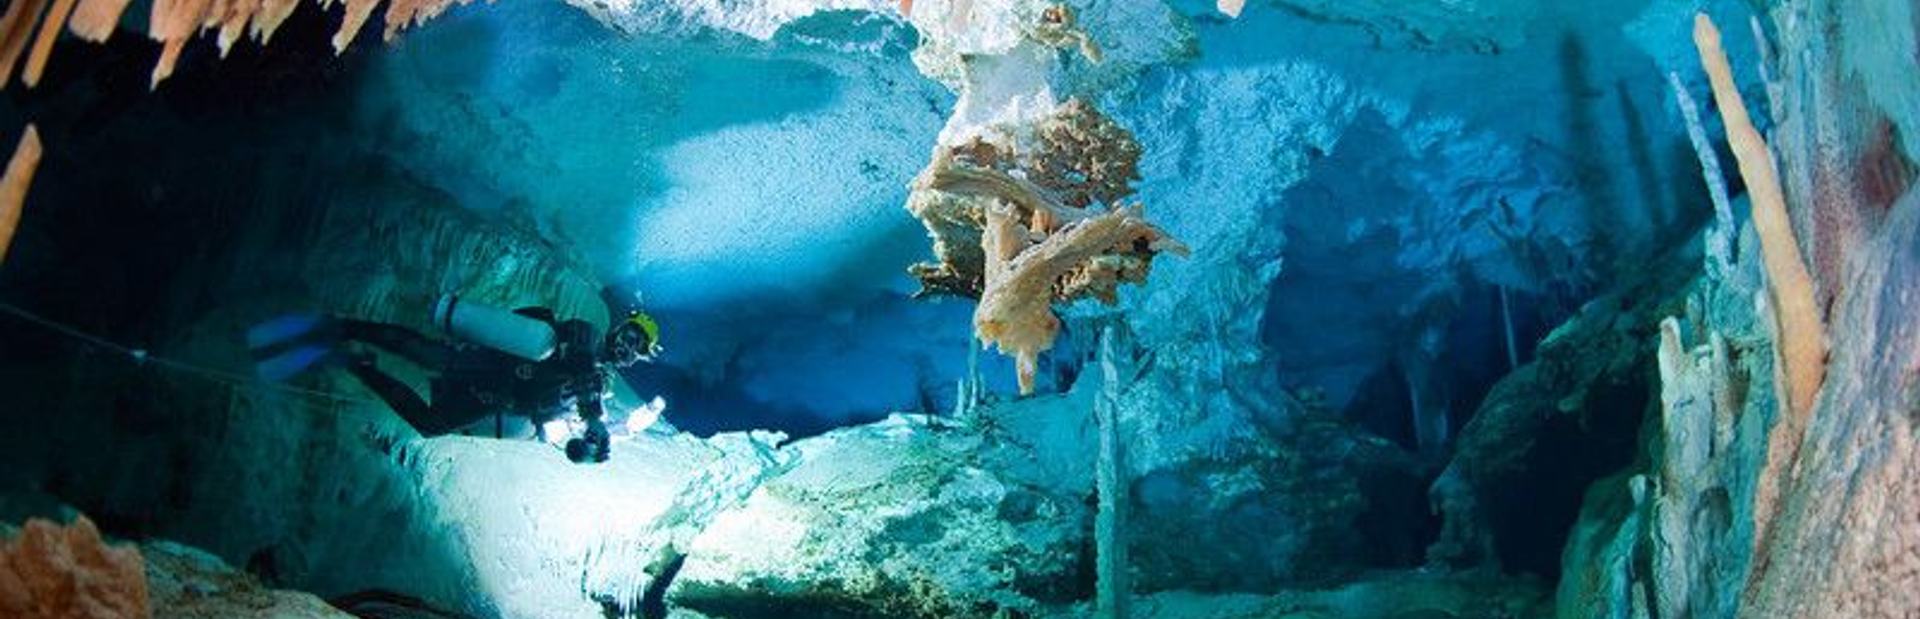 Crystal Caves of Abaco Image 1